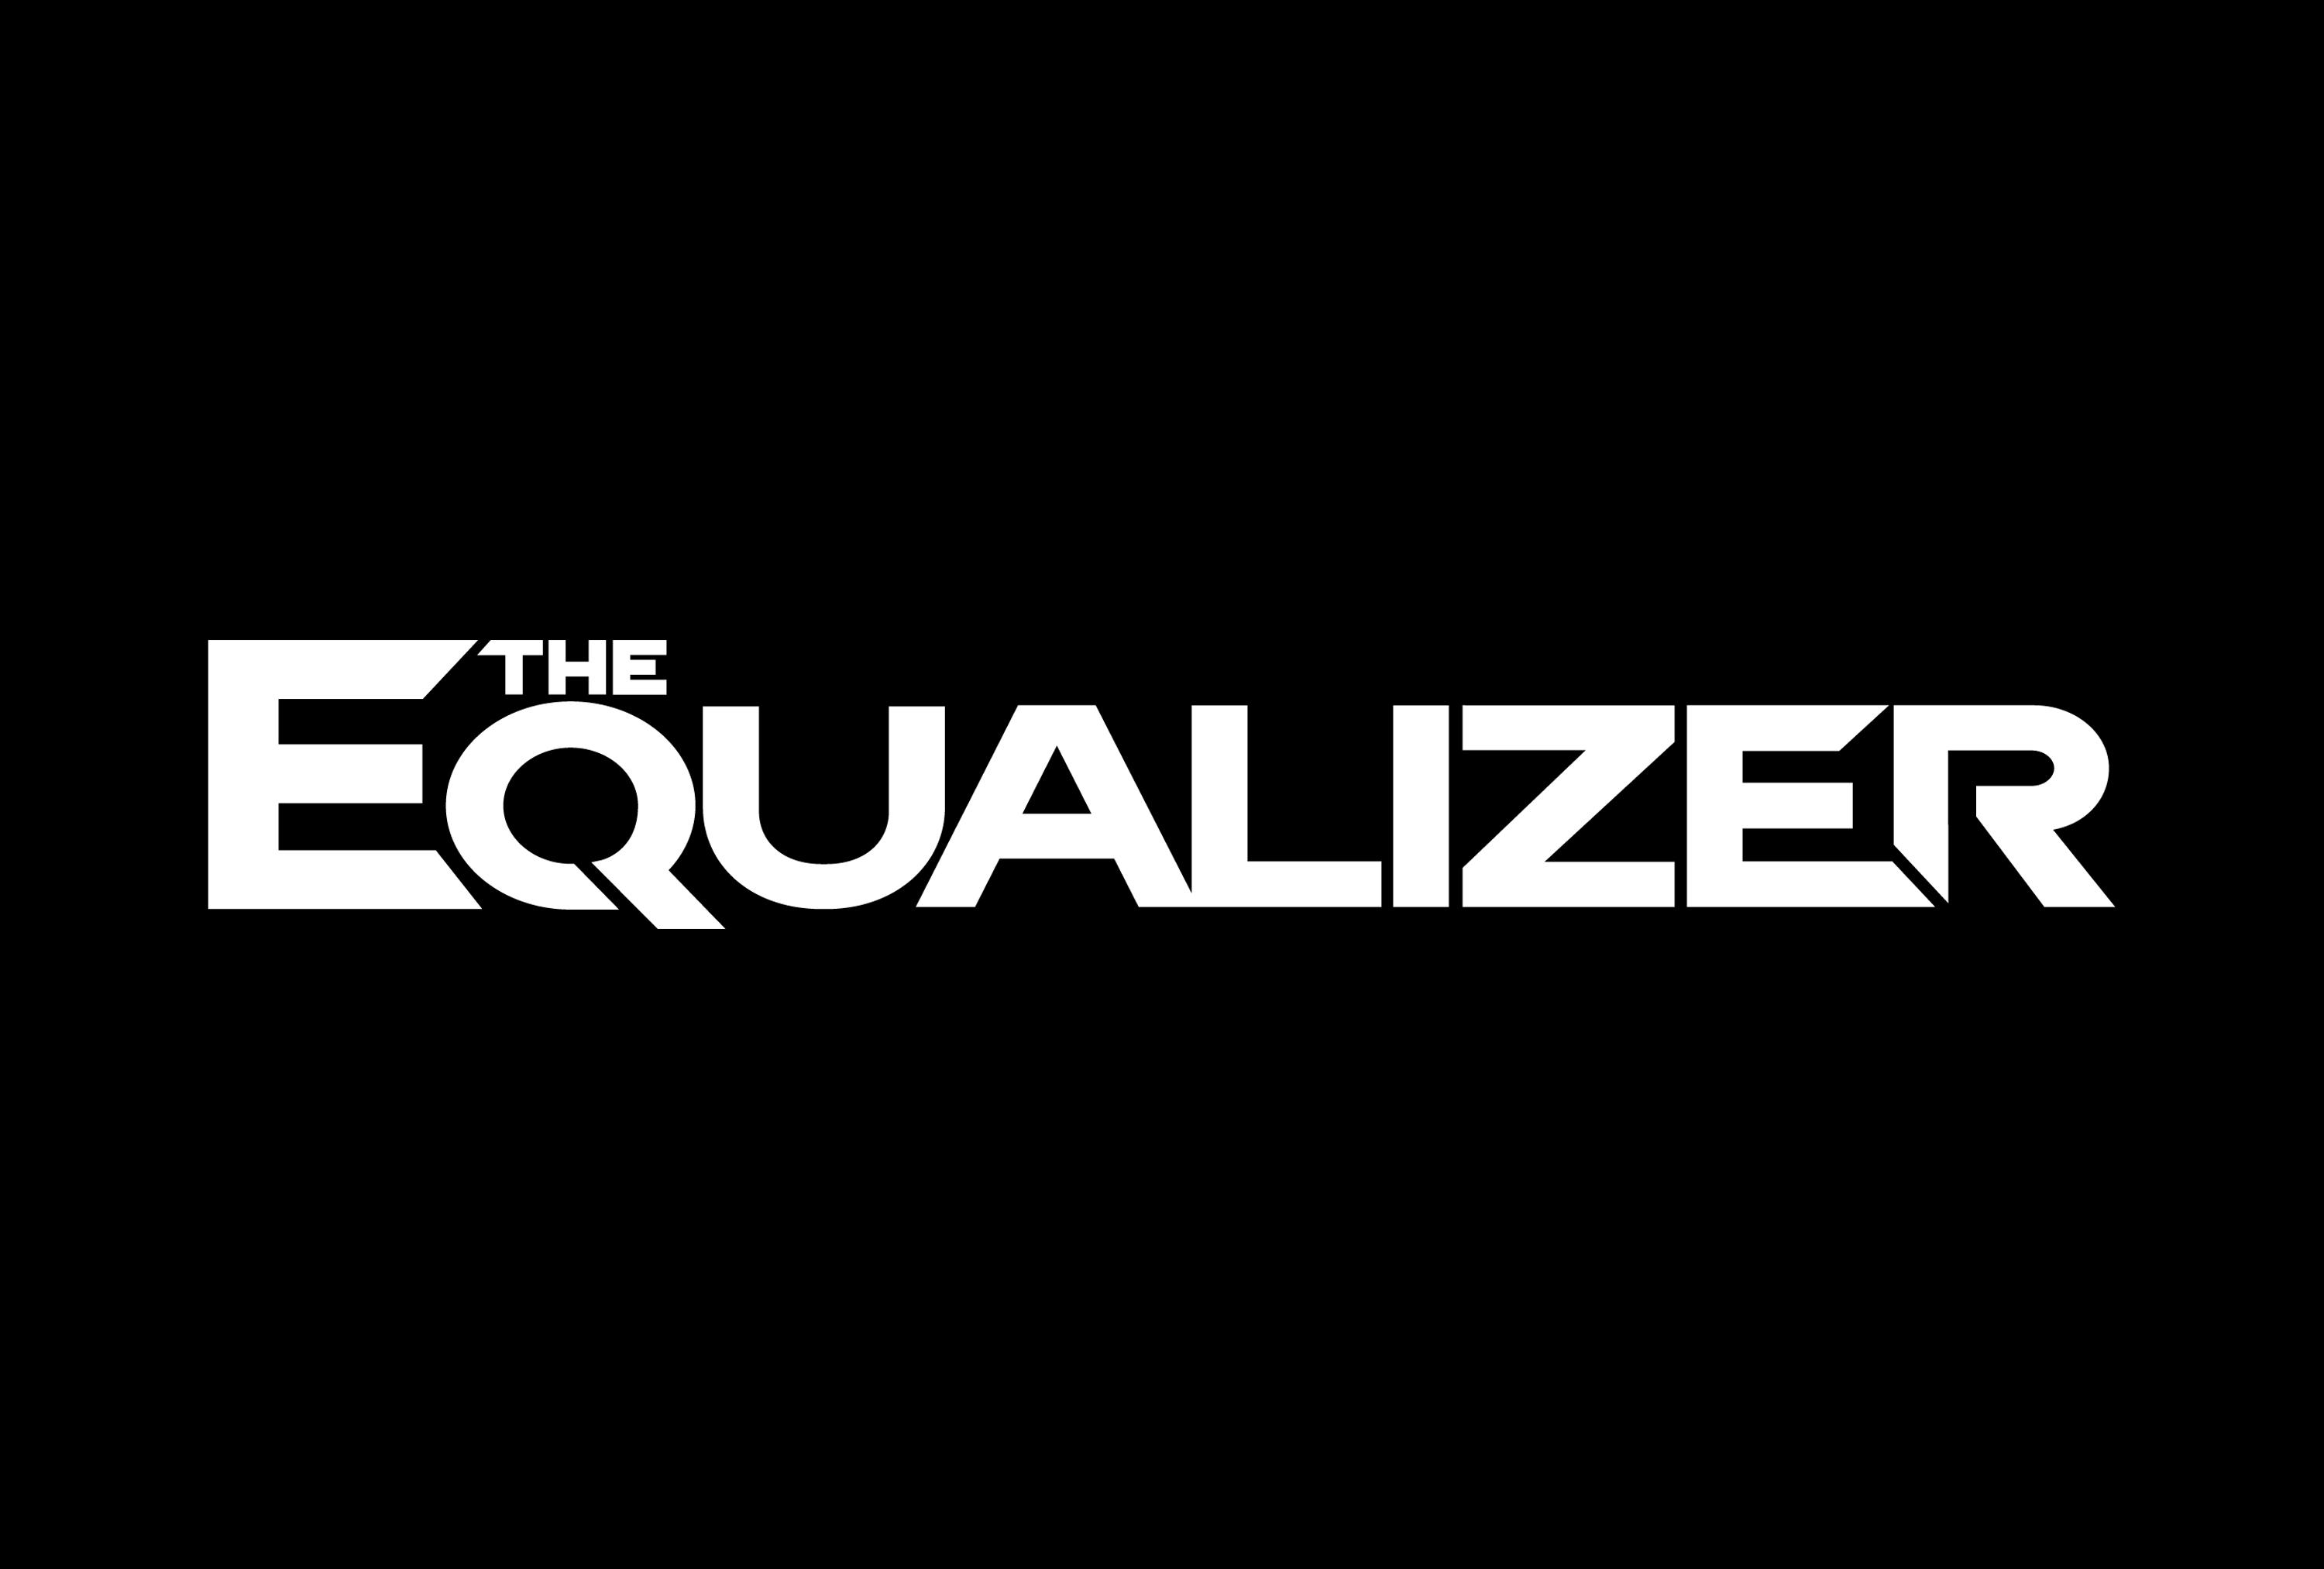 The Equalizer Wallpaper X